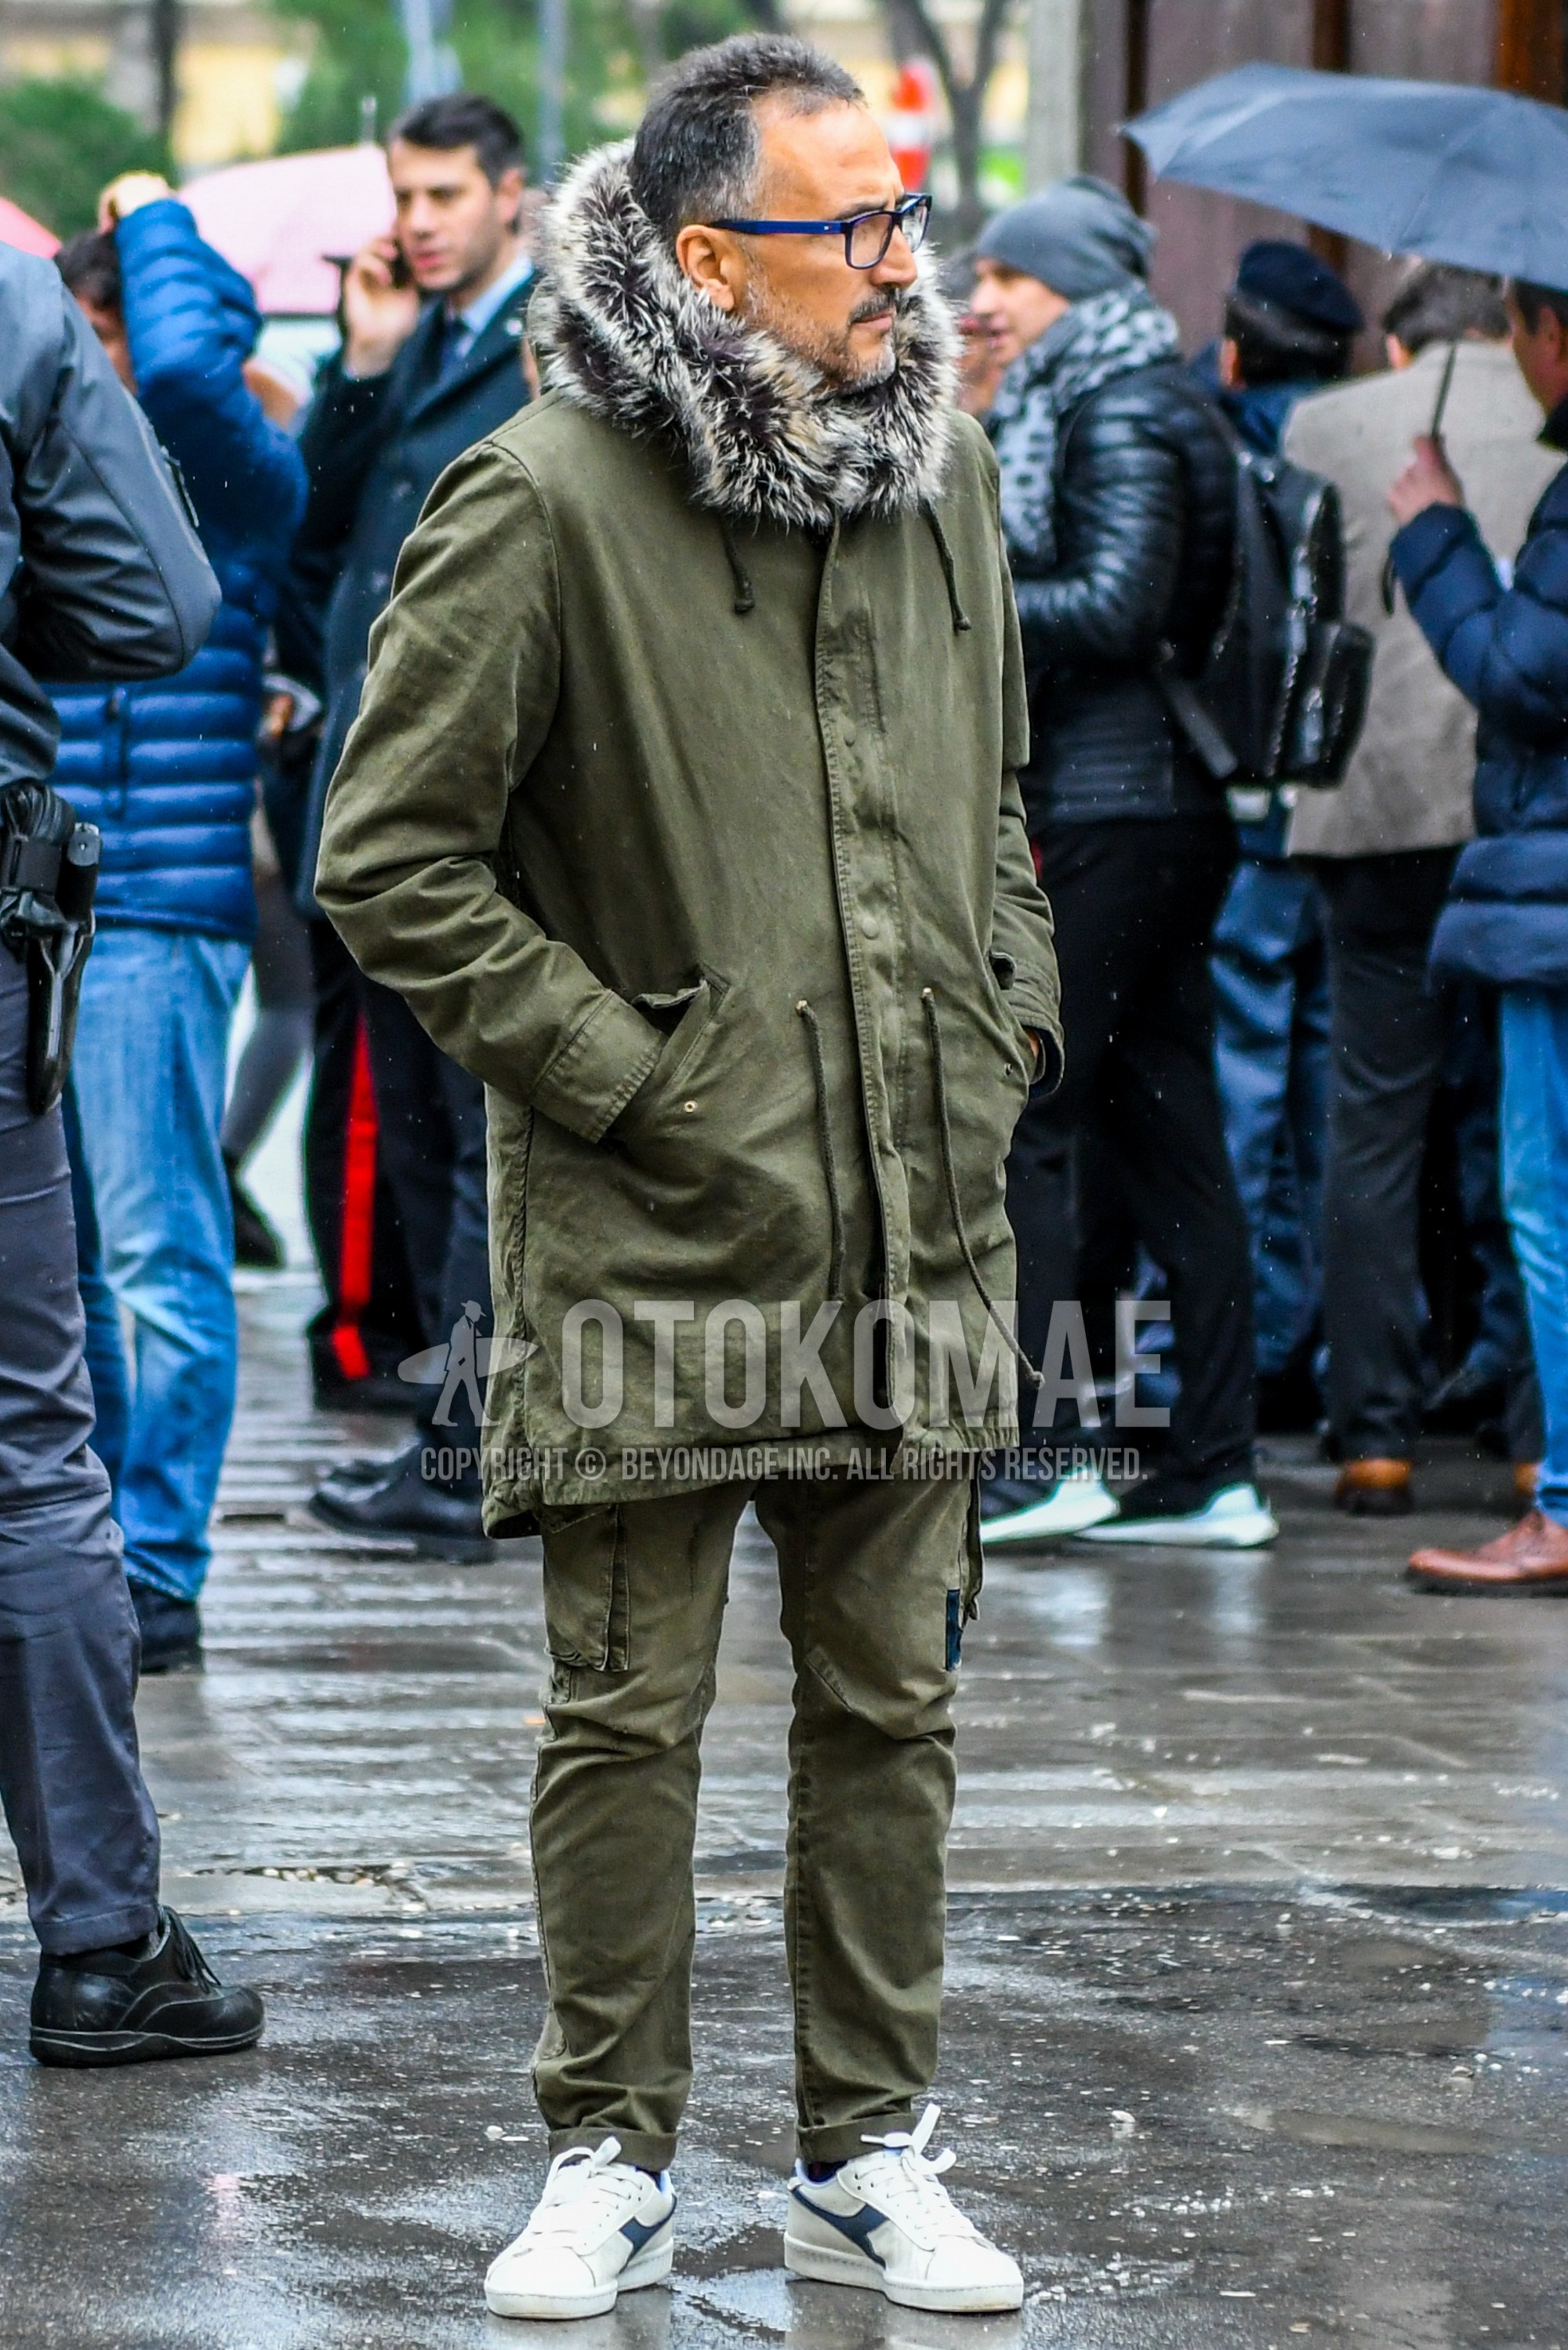 Men's autumn winter outfit with plain glasses, olive green plain mod coat, olive green plain cargo pants, white low-cut sneakers.